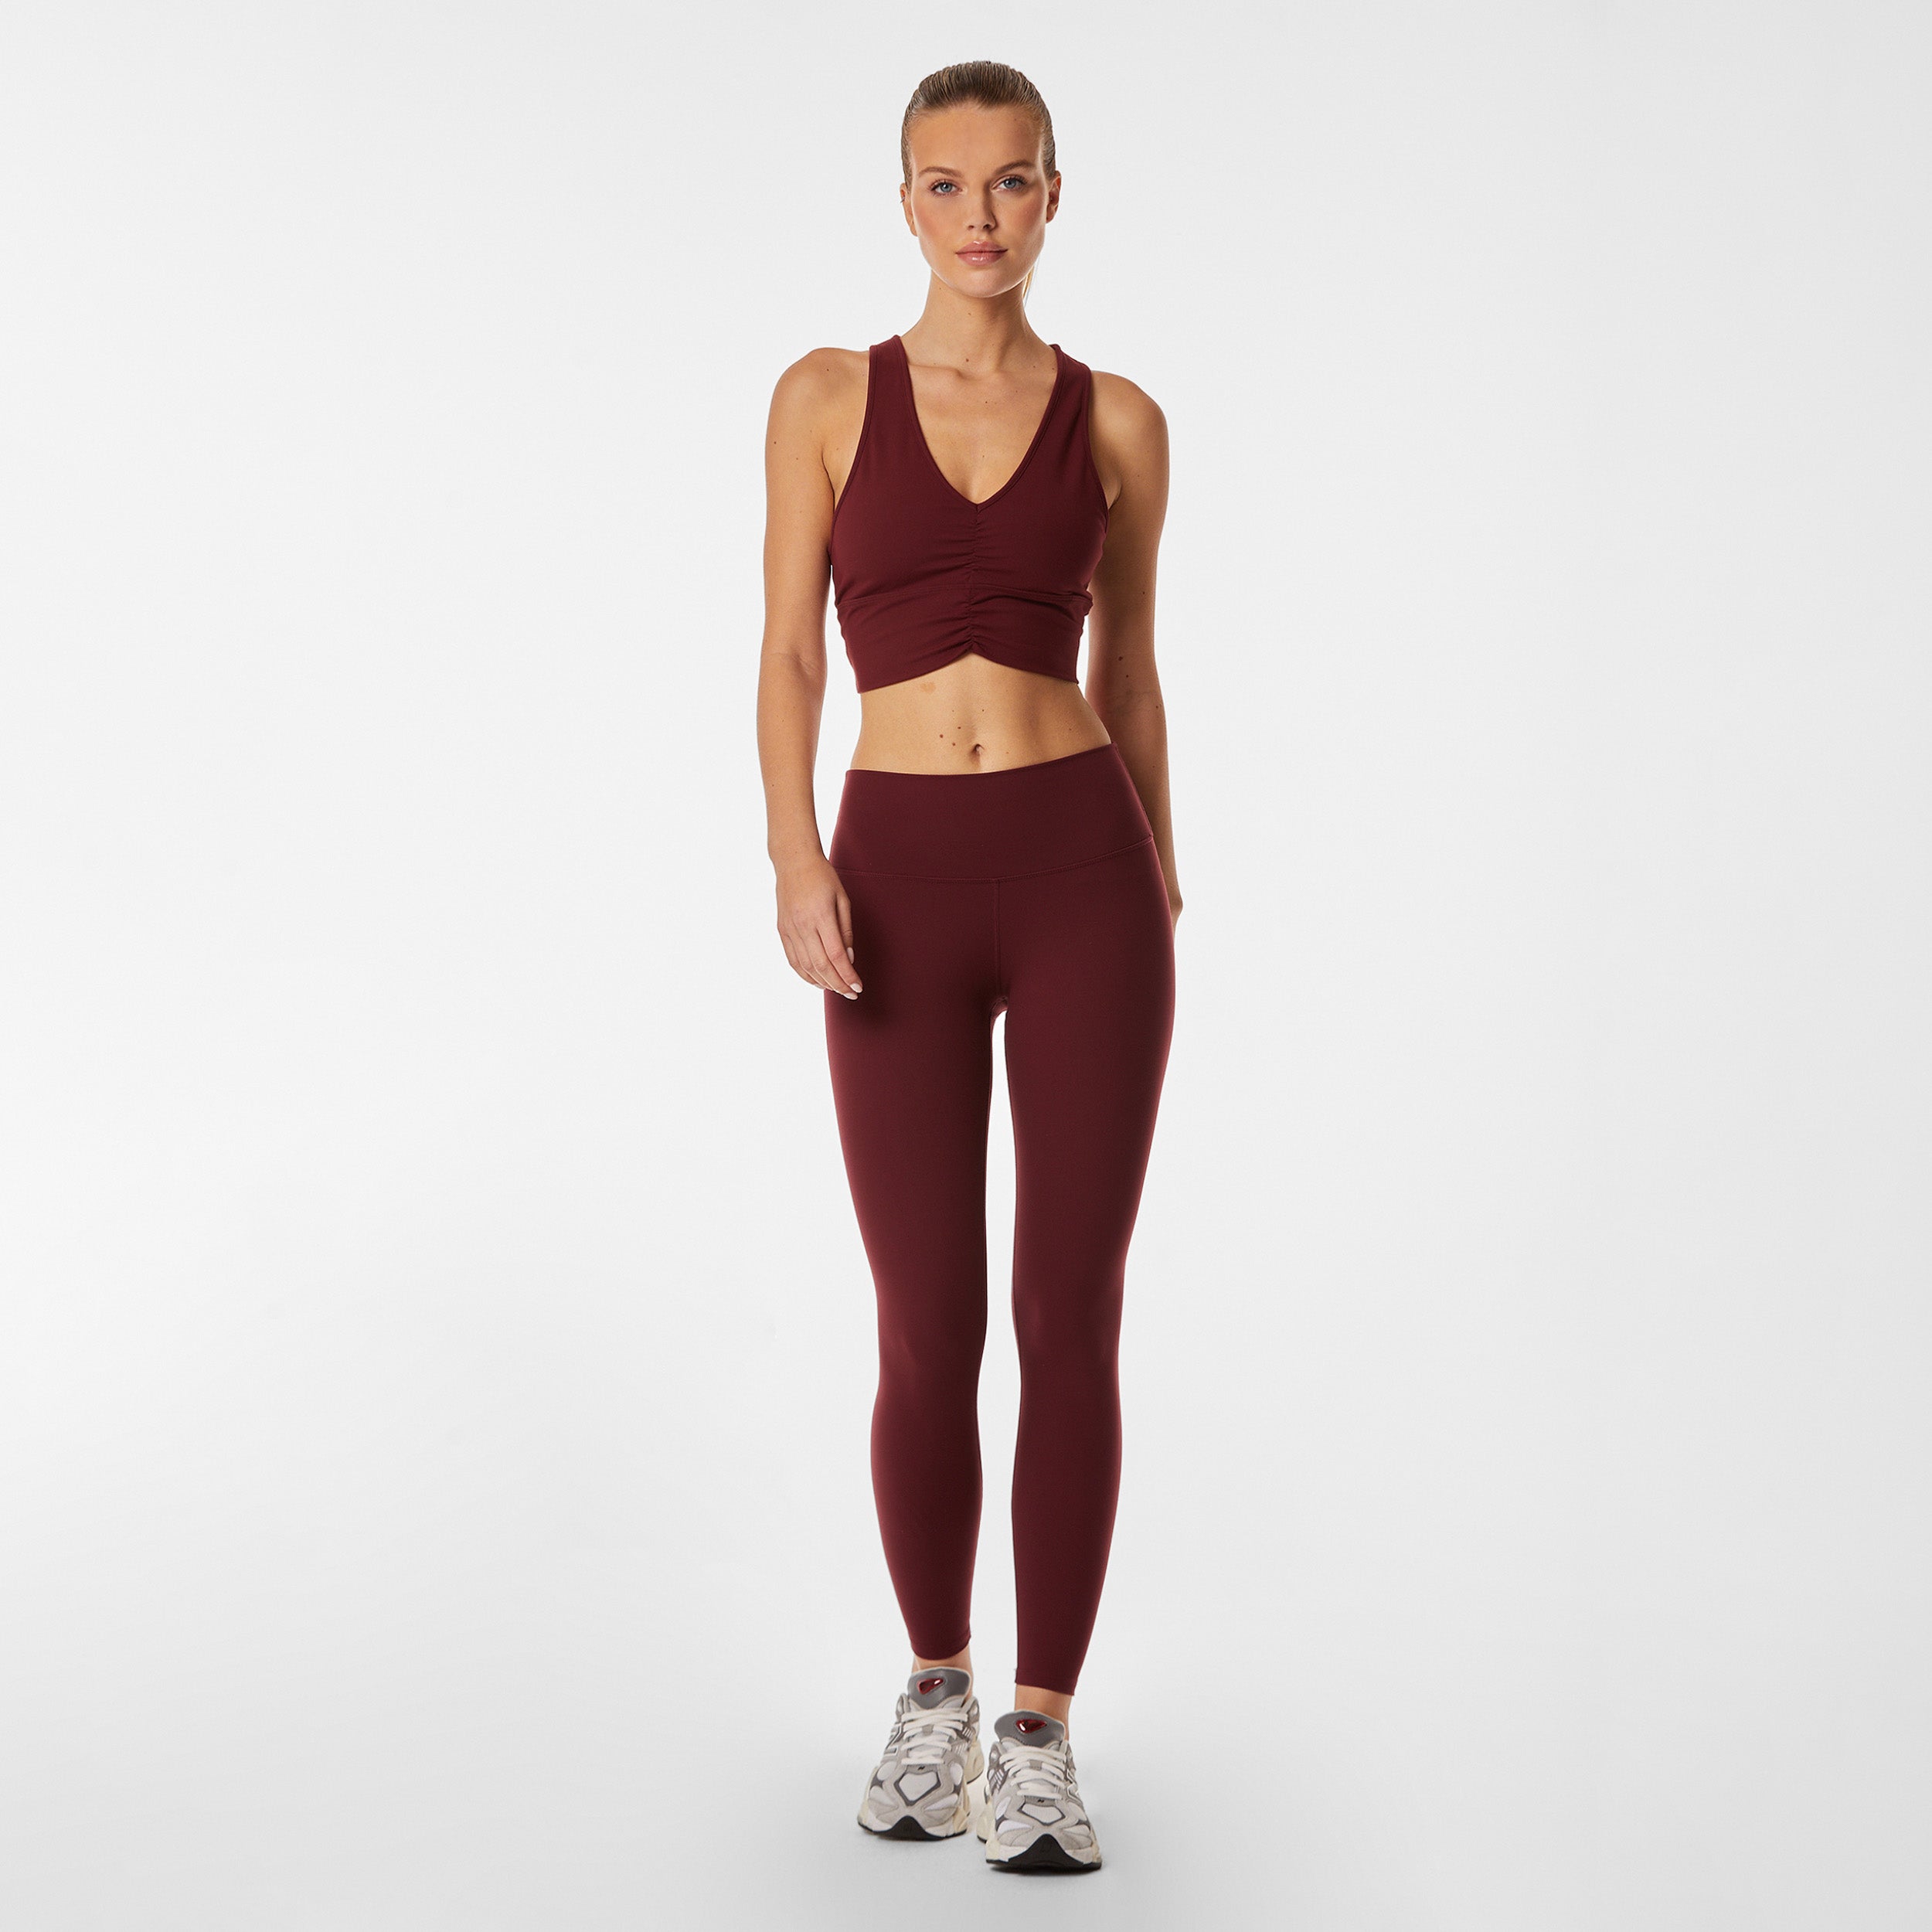 Full body view of woman wearing ruched front red racerback bra and matching legging